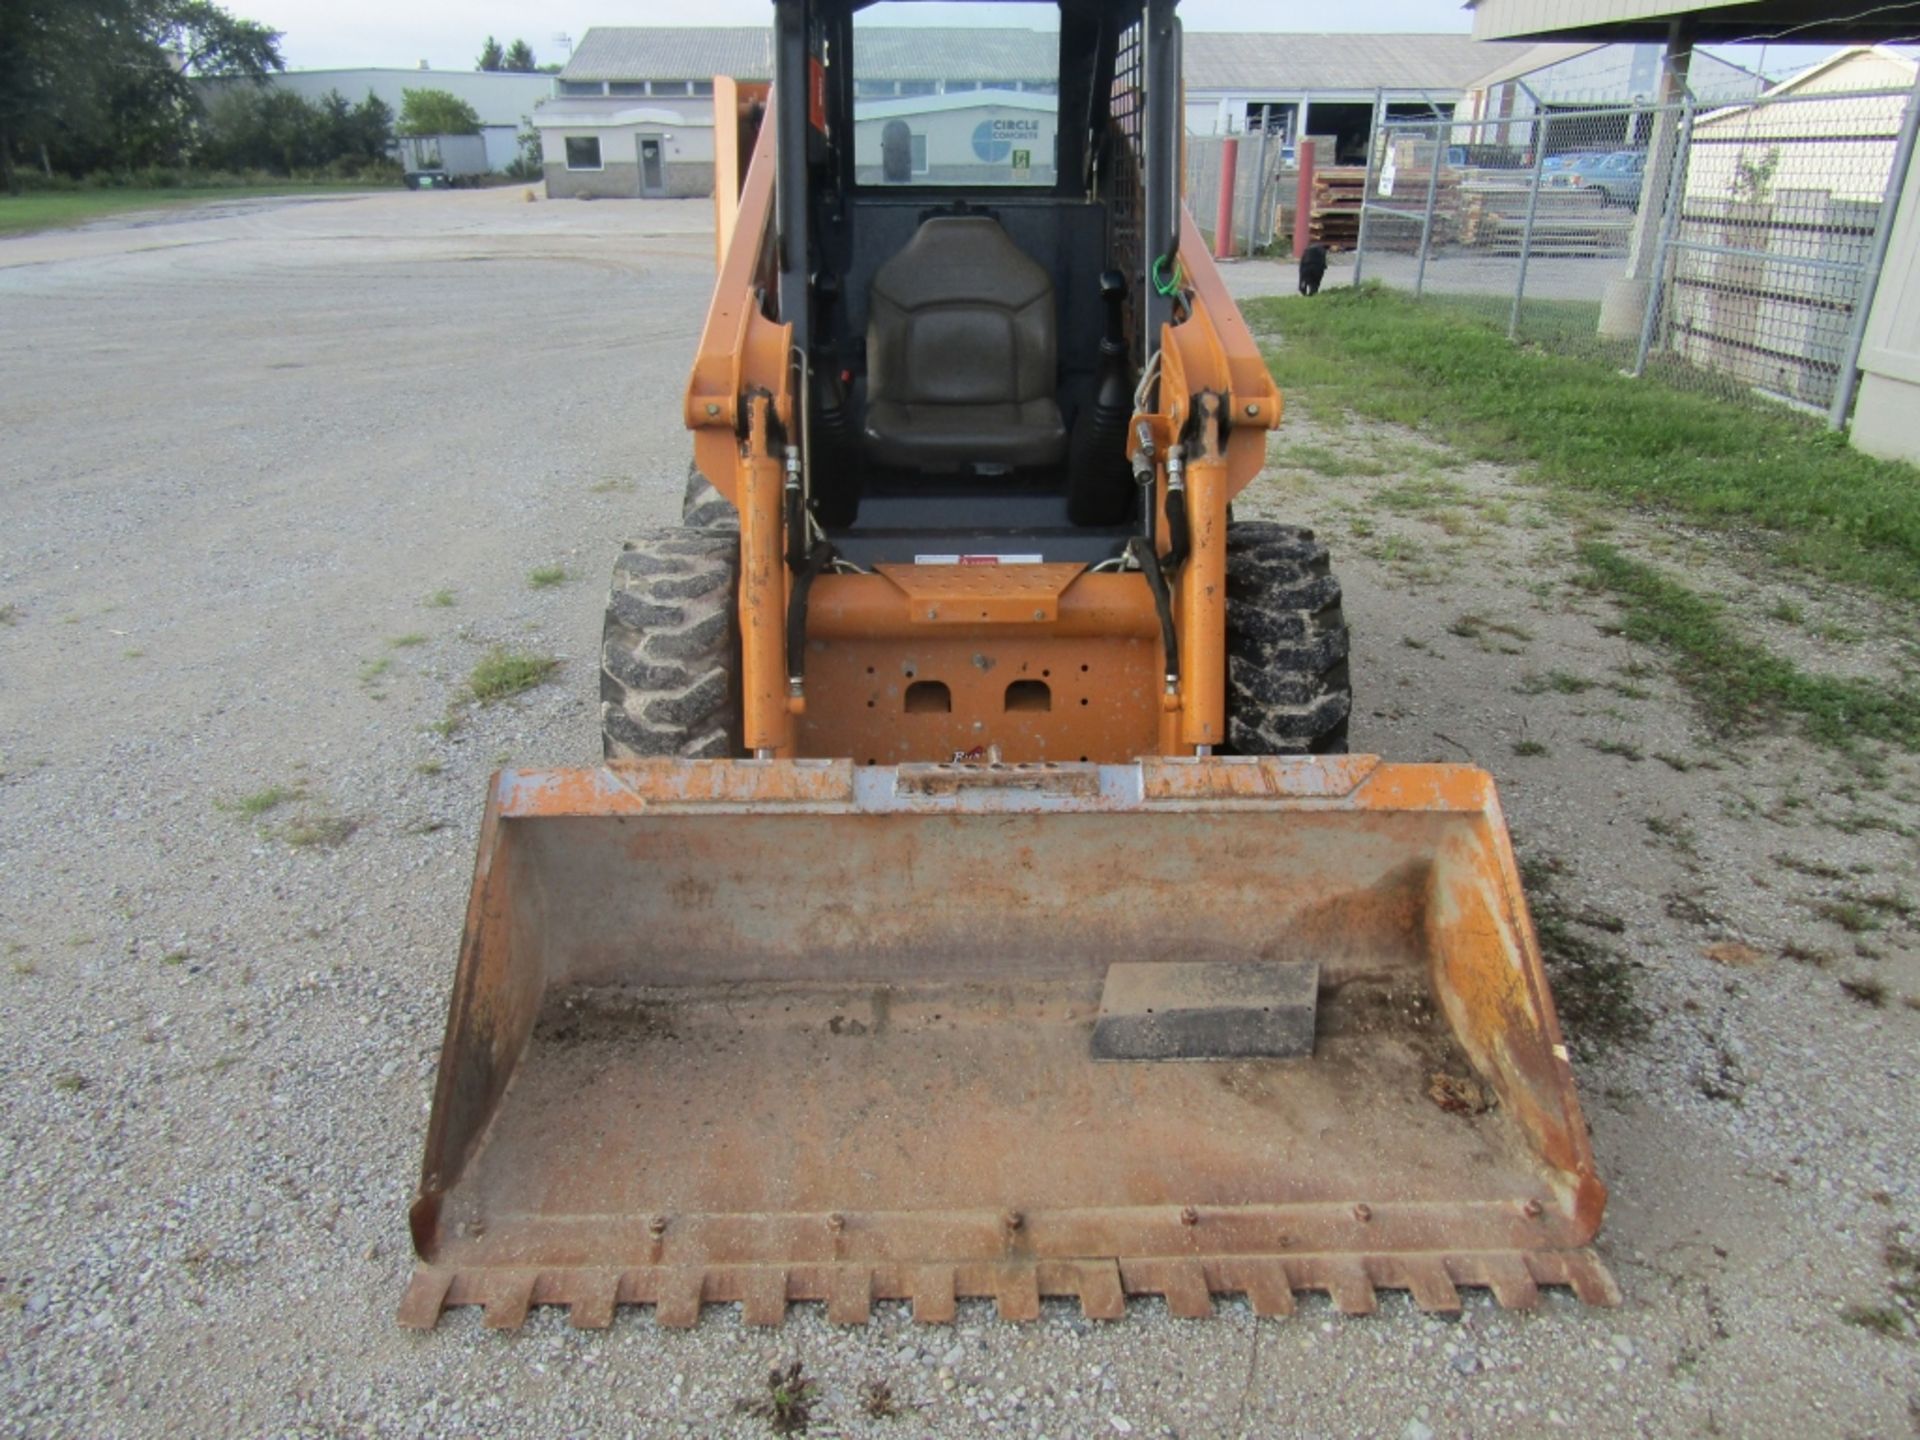 2008 Case 420 Uniloader, 198 Hours, ID #N7M466574, Enclosed rope, bucket., - Image 16 of 18